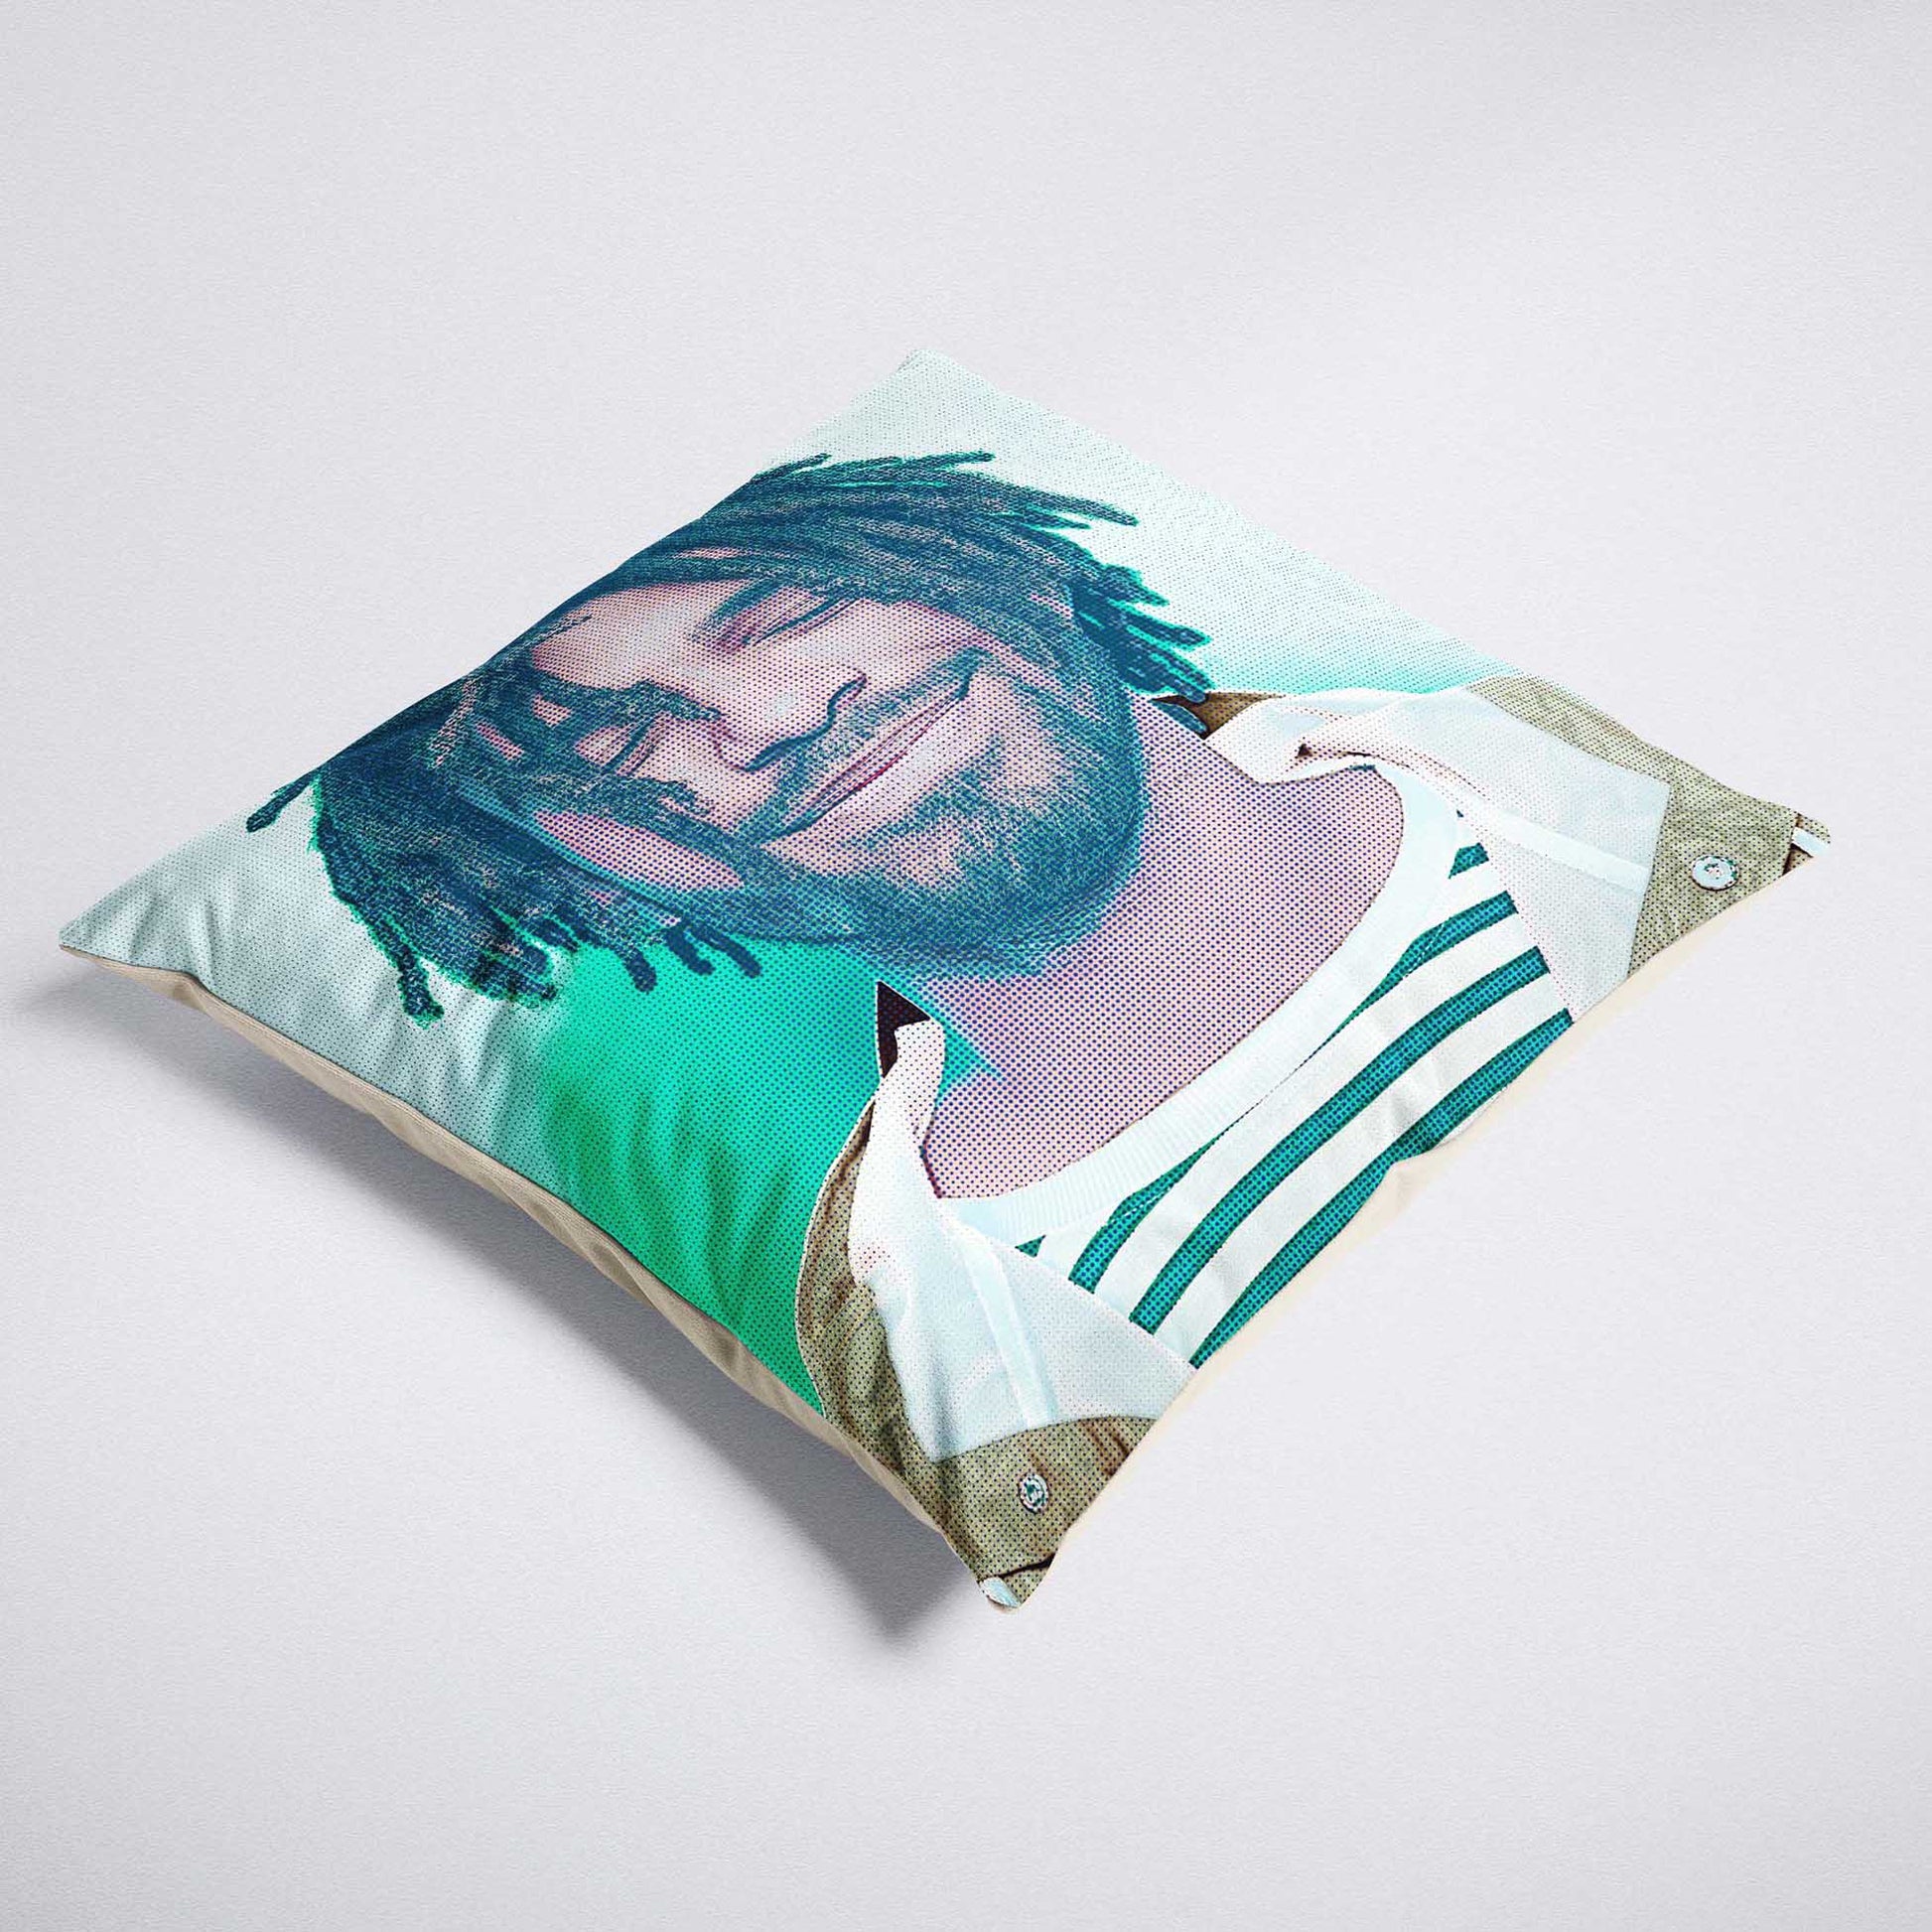 The Personalised Teal Grunge Cushion combines the best of both worlds - vintage appeal and personalization. It features a custom print from your photo, incorporating a halftone effect and grunge texture for an old school aesthetic